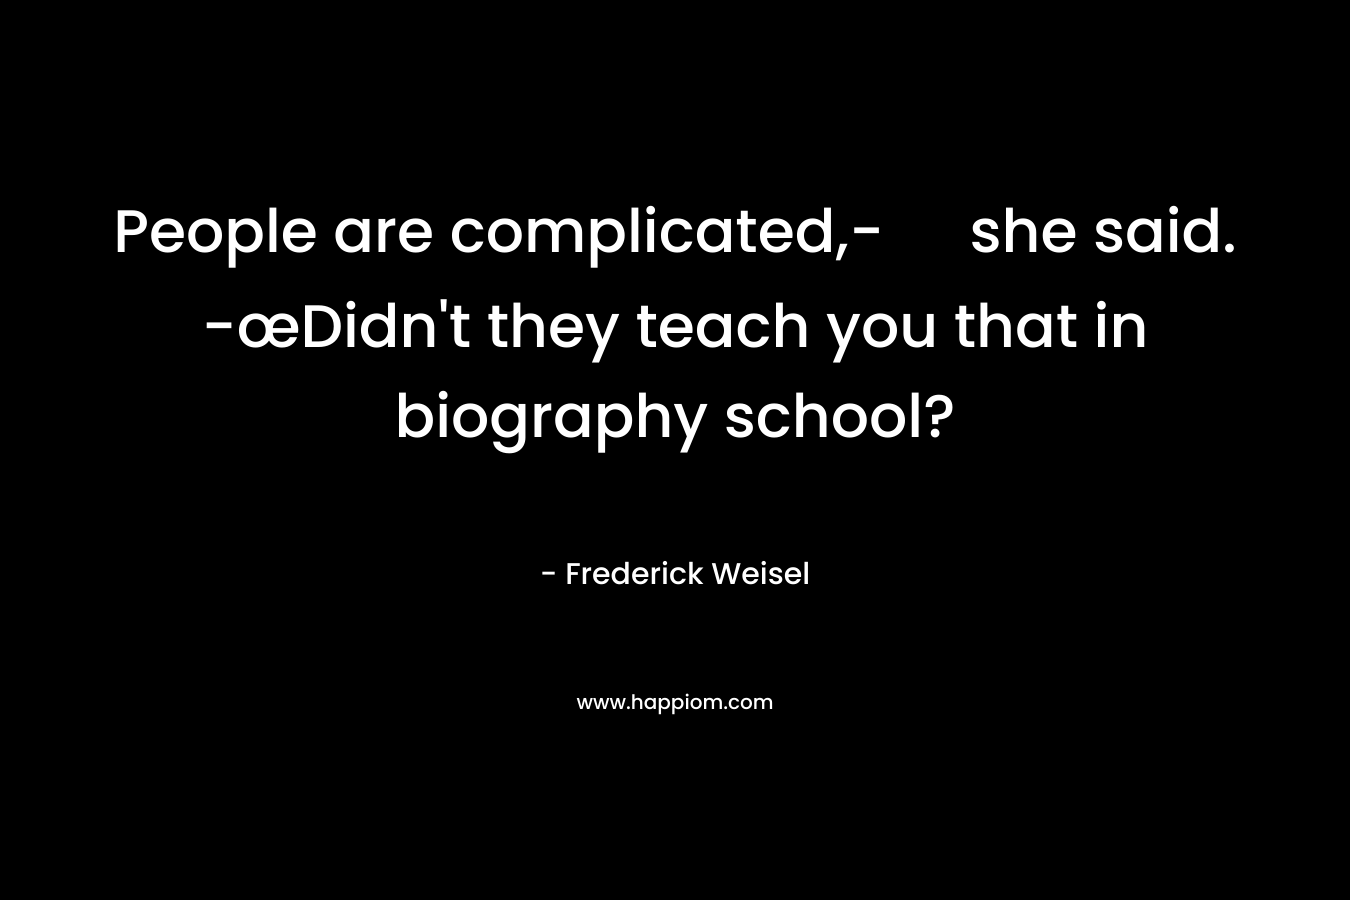 People are complicated,- she said. -œDidn't they teach you that in biography school?